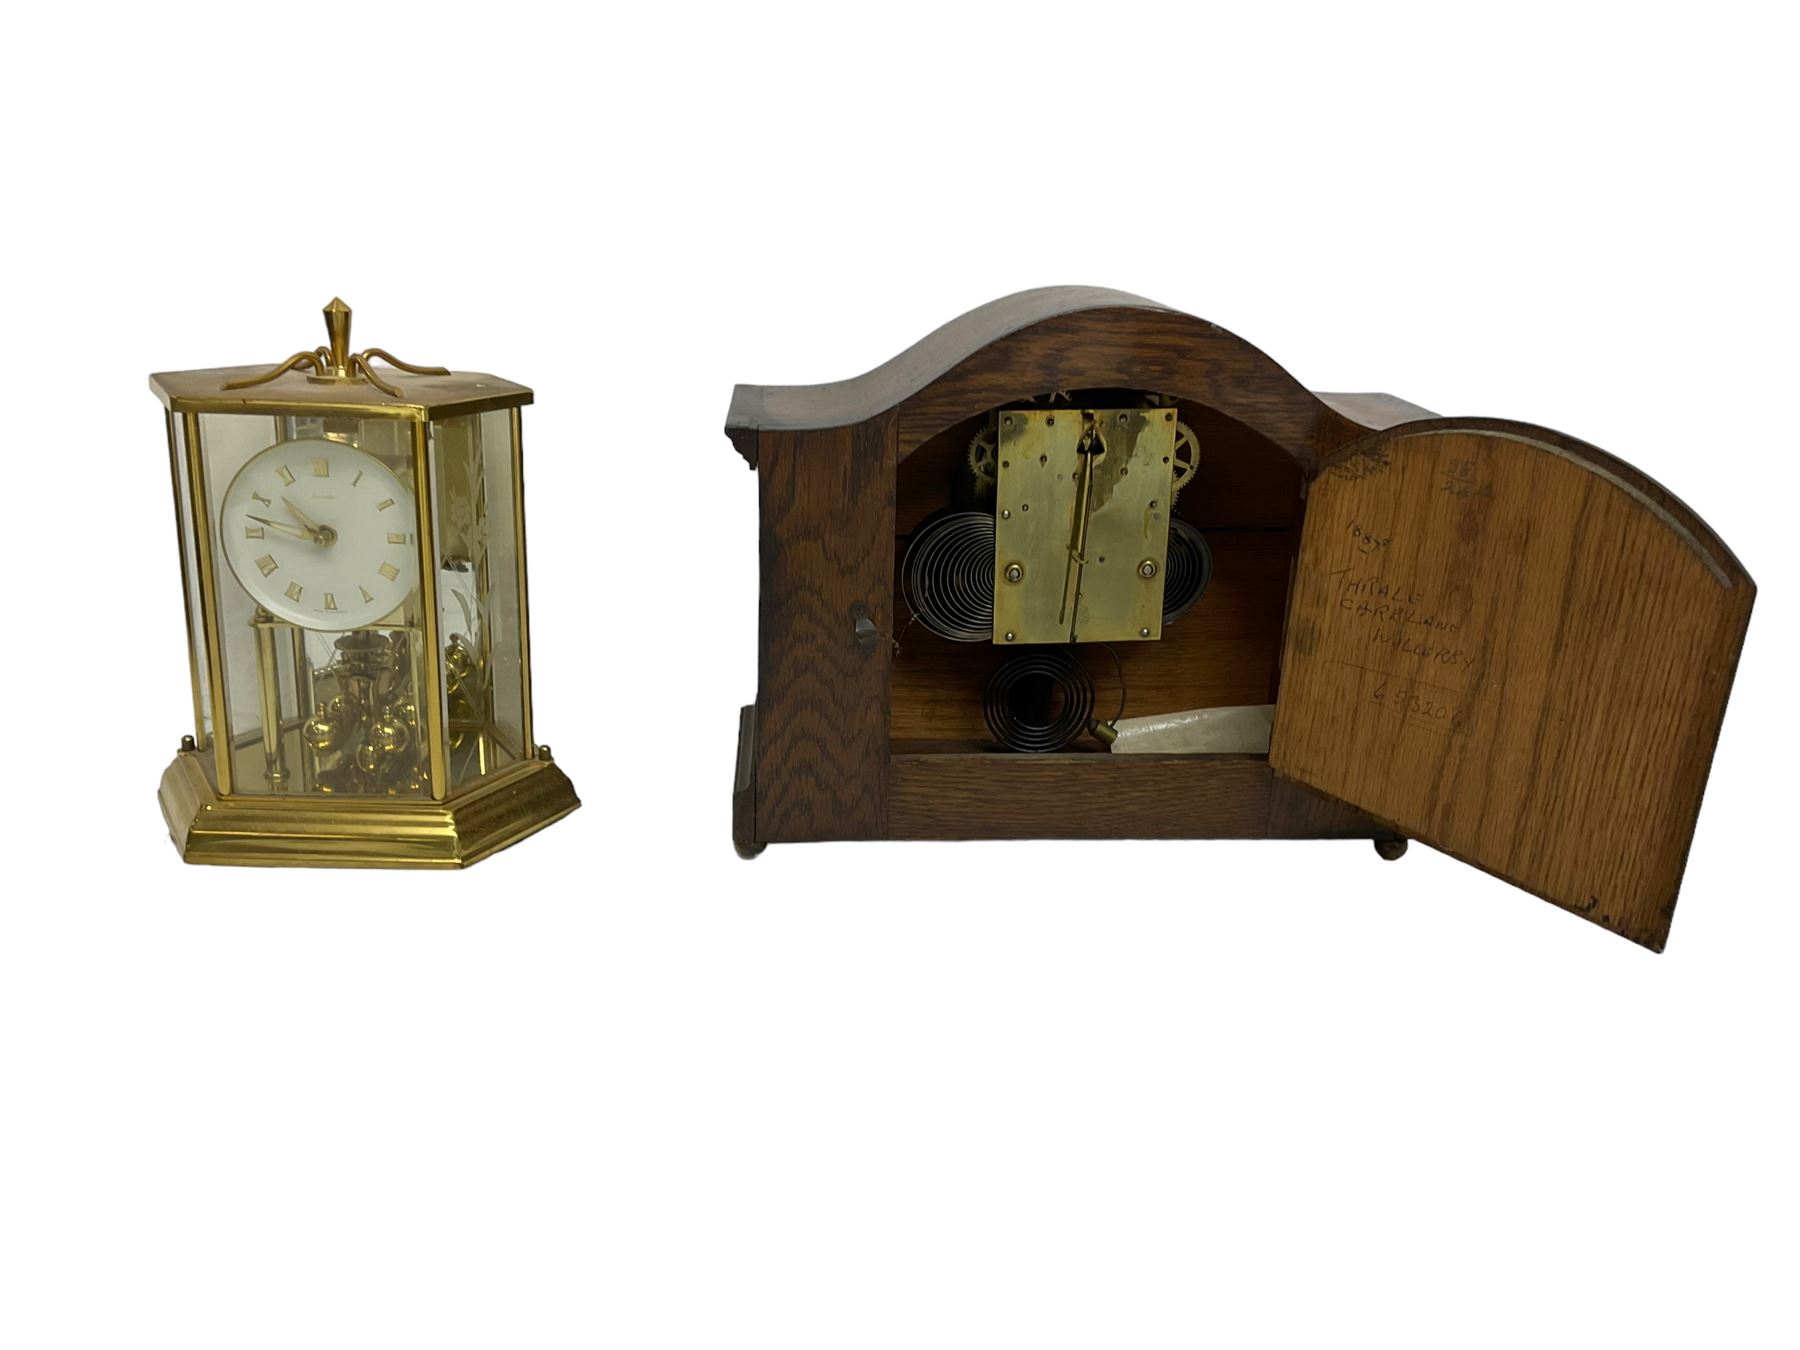 1930’s 8-day striking mantle clock and a brass cased kundo torsion clock - Image 2 of 2